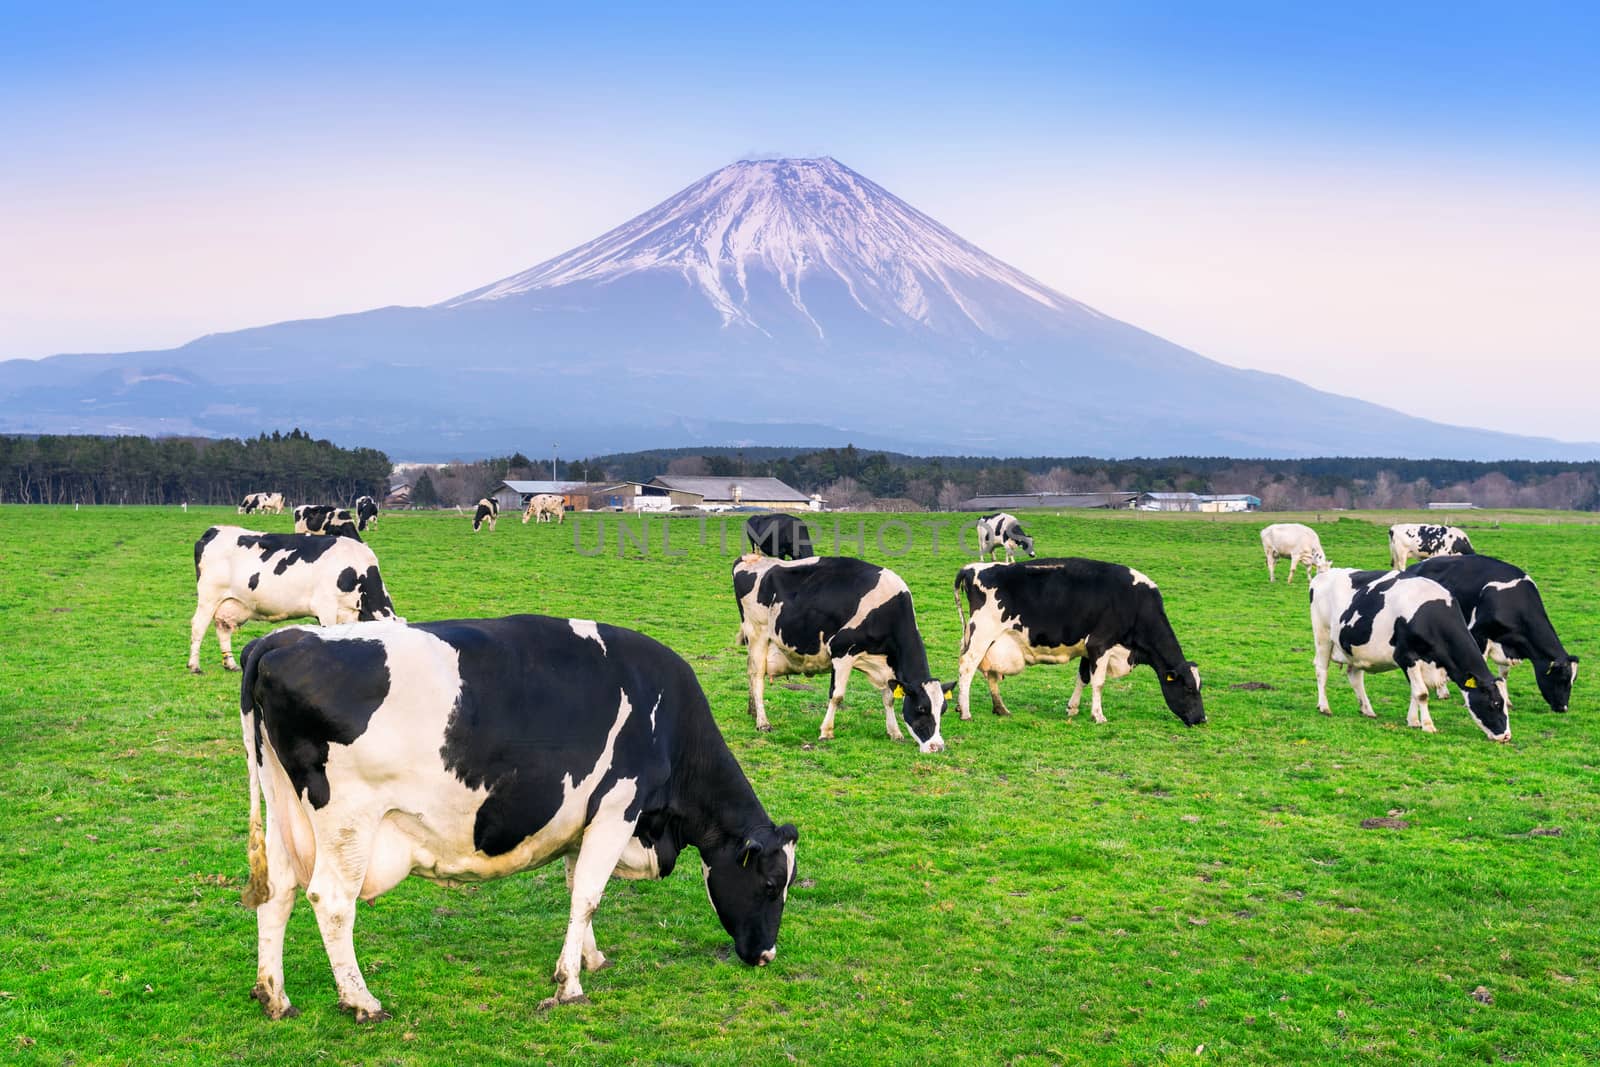 Cows eating lush grass on the green field in front of Fuji mountain, Japan.